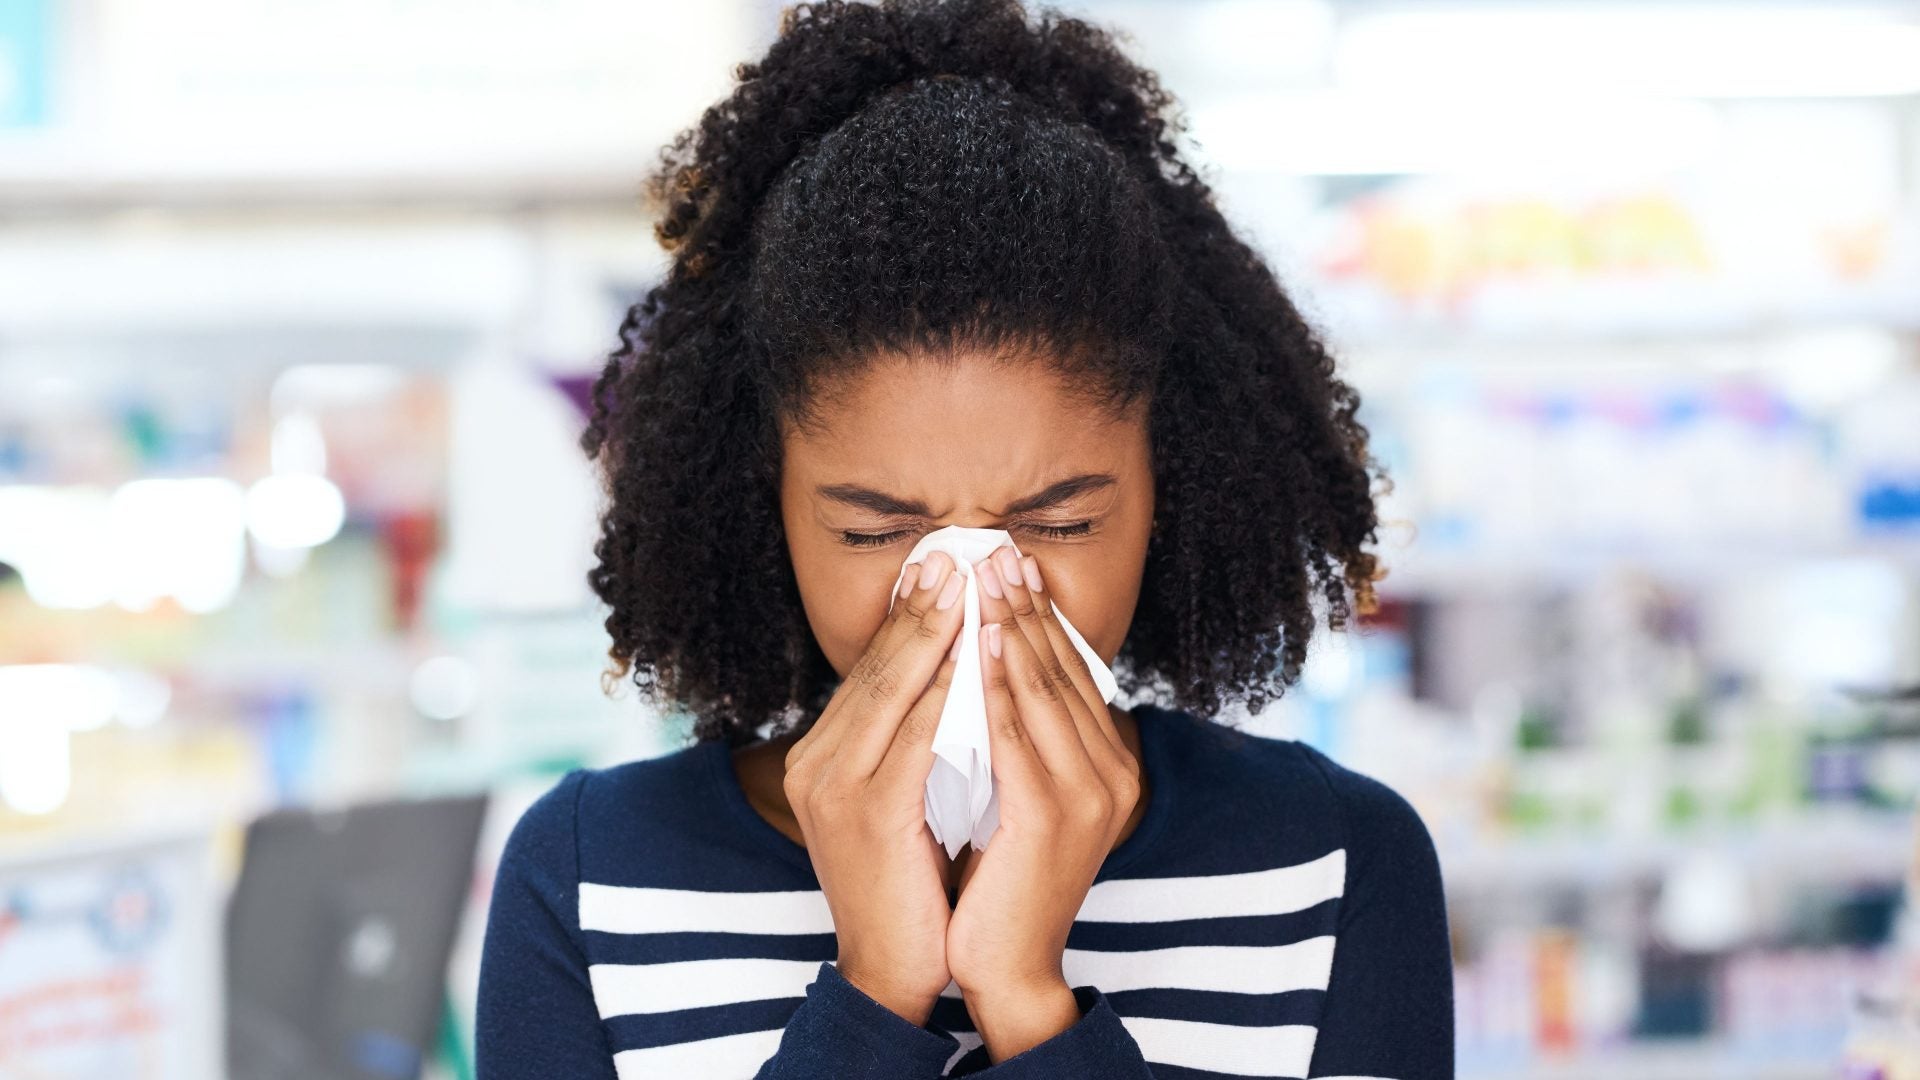 Spring Allergies Got You Down? Here Are 5 Must-Have Products To Beat The Sneeze